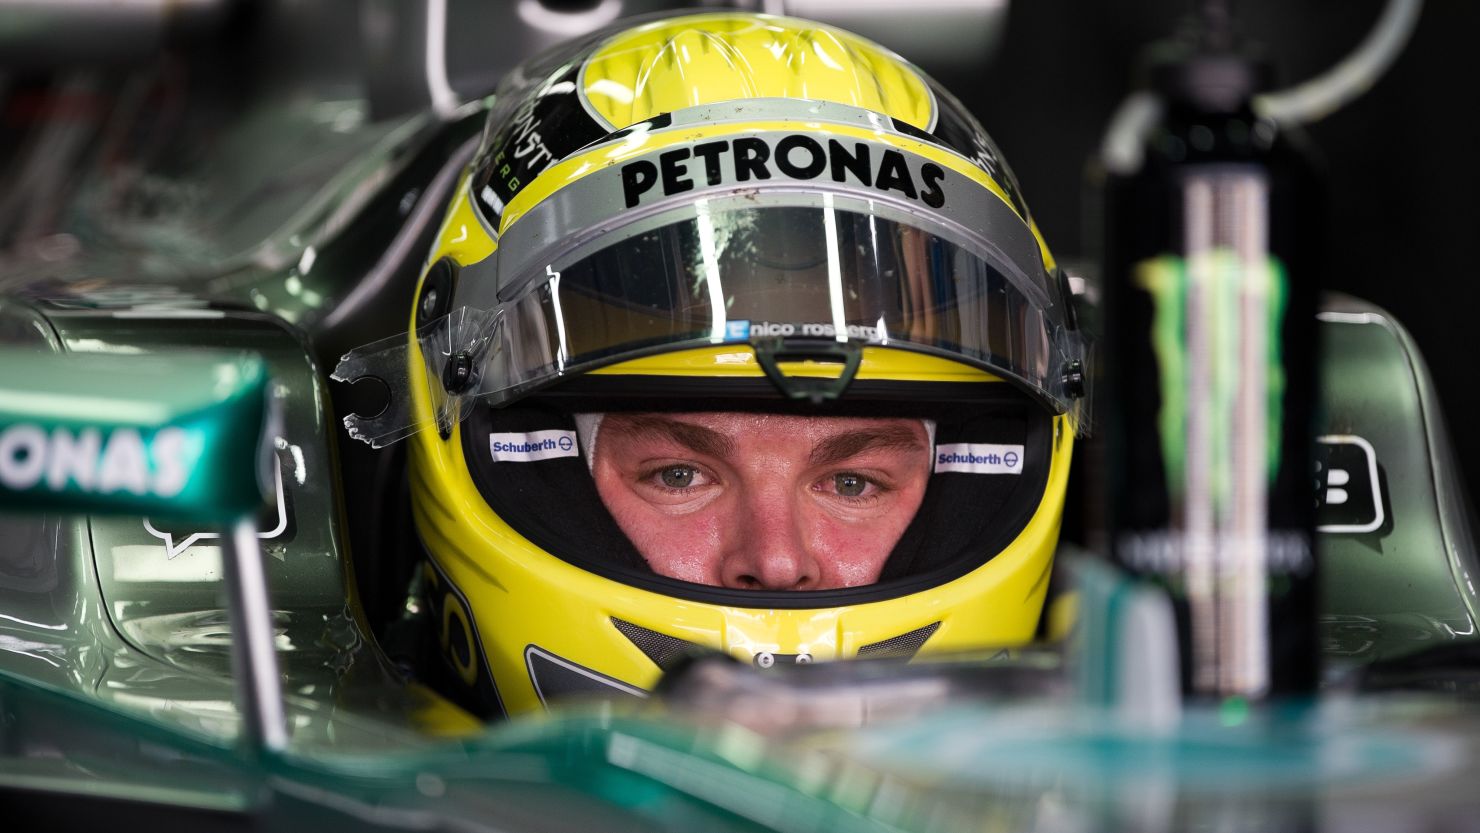 Mercedes driver Nico Rosberg wearing a helmet like the one which was stolen on Sunday.